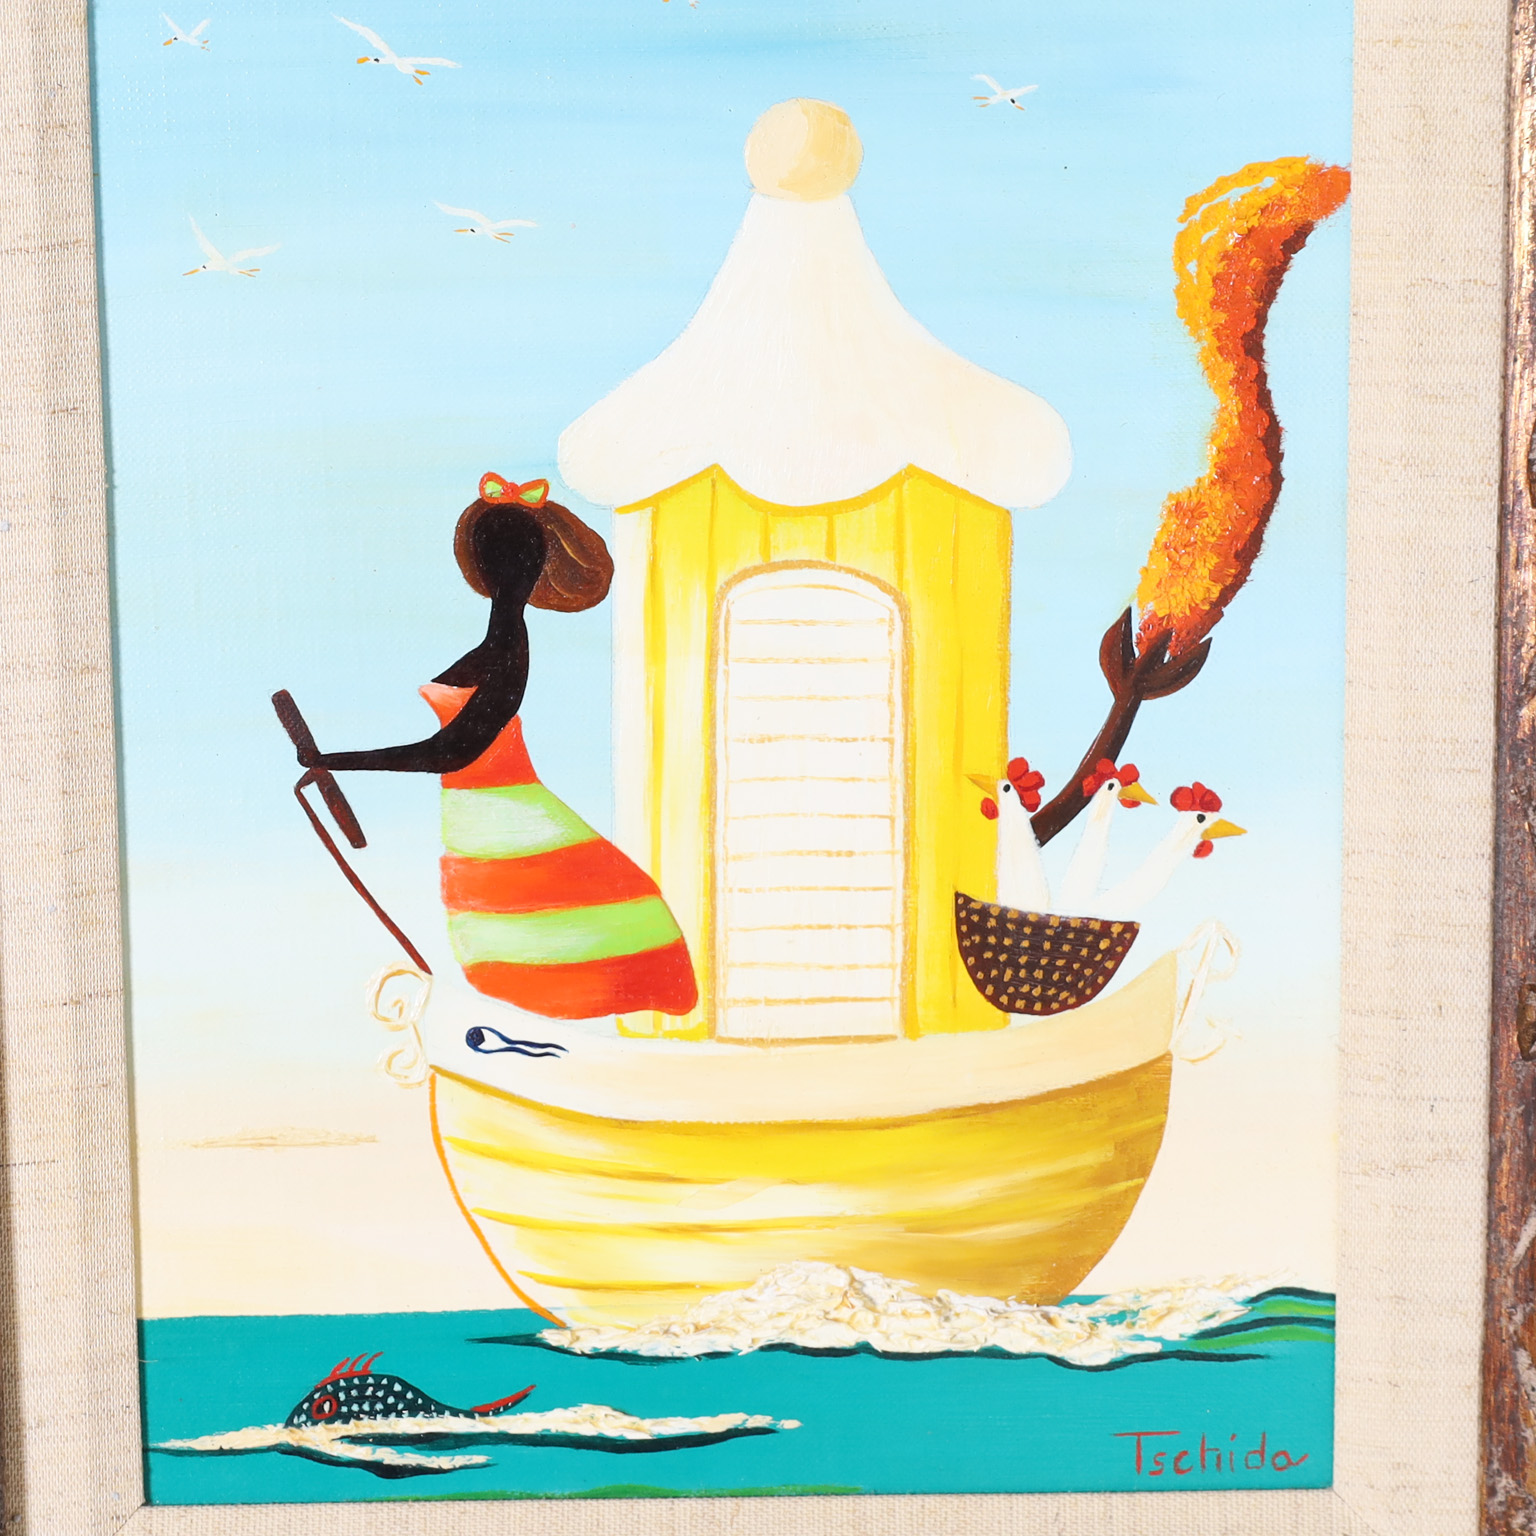 Caribbean Painting on Canvas of a Boat with Figures in the Style of Orville Bulman